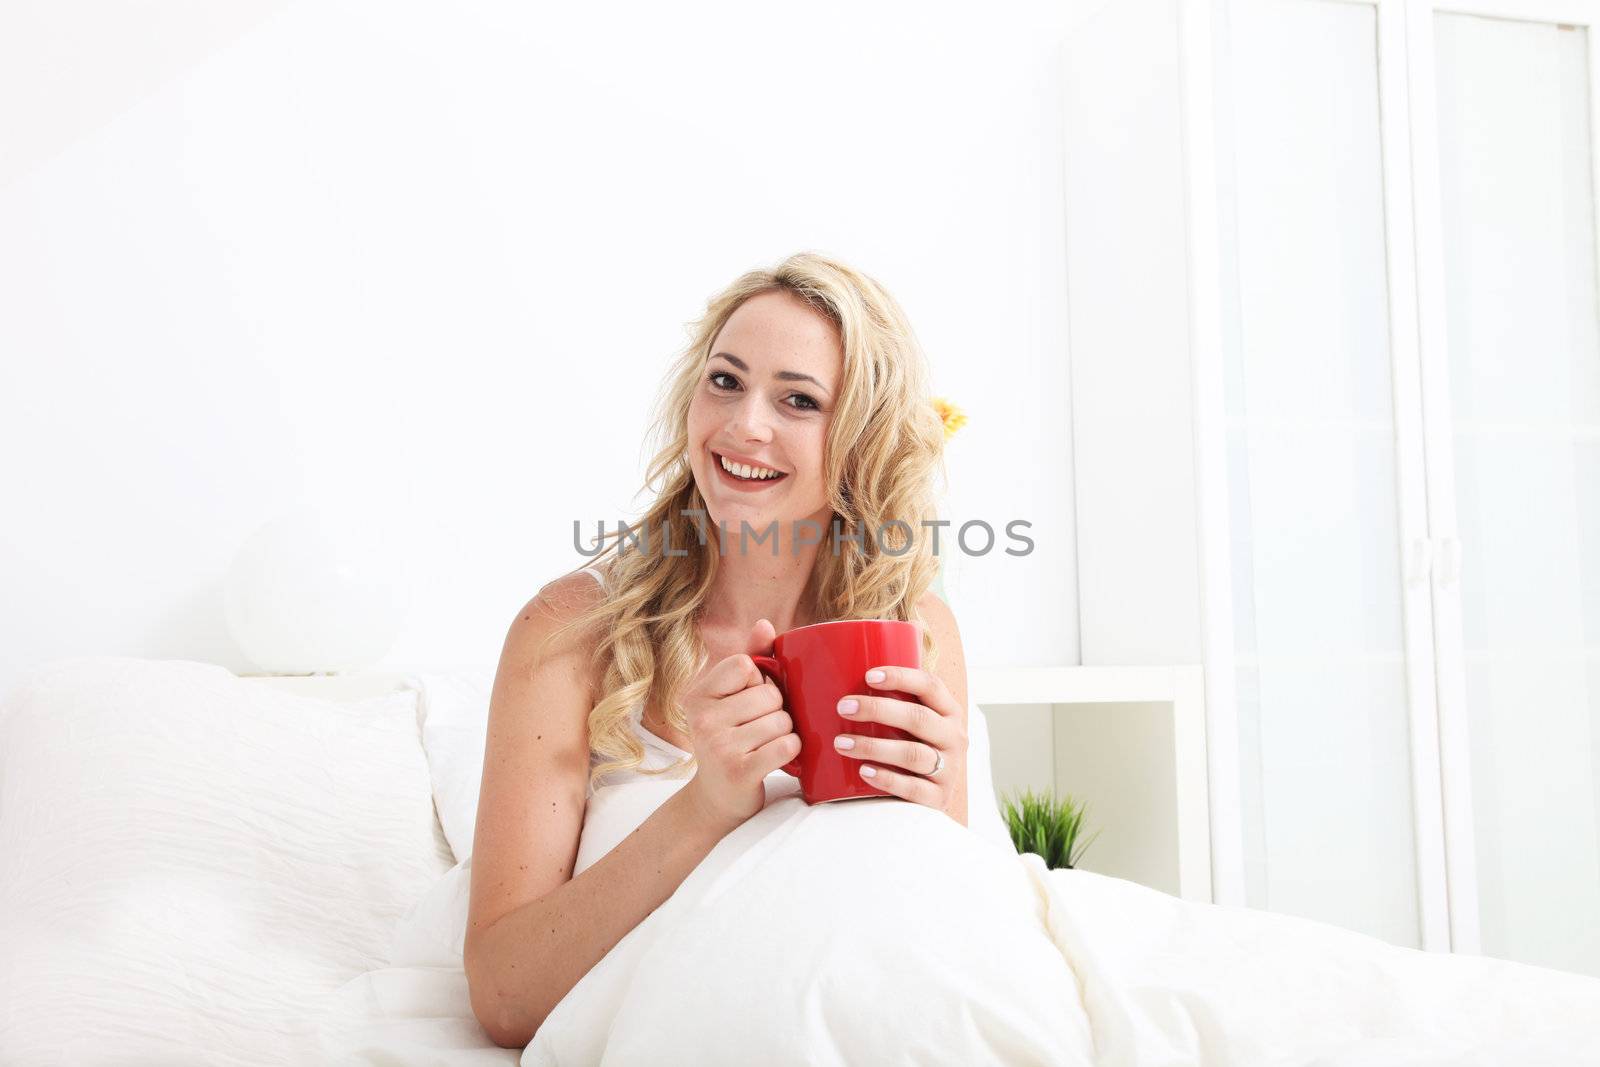 Friendly woman with beautiful smile cuddled up in her nice warm bed enjoying an early morning cup of coffee